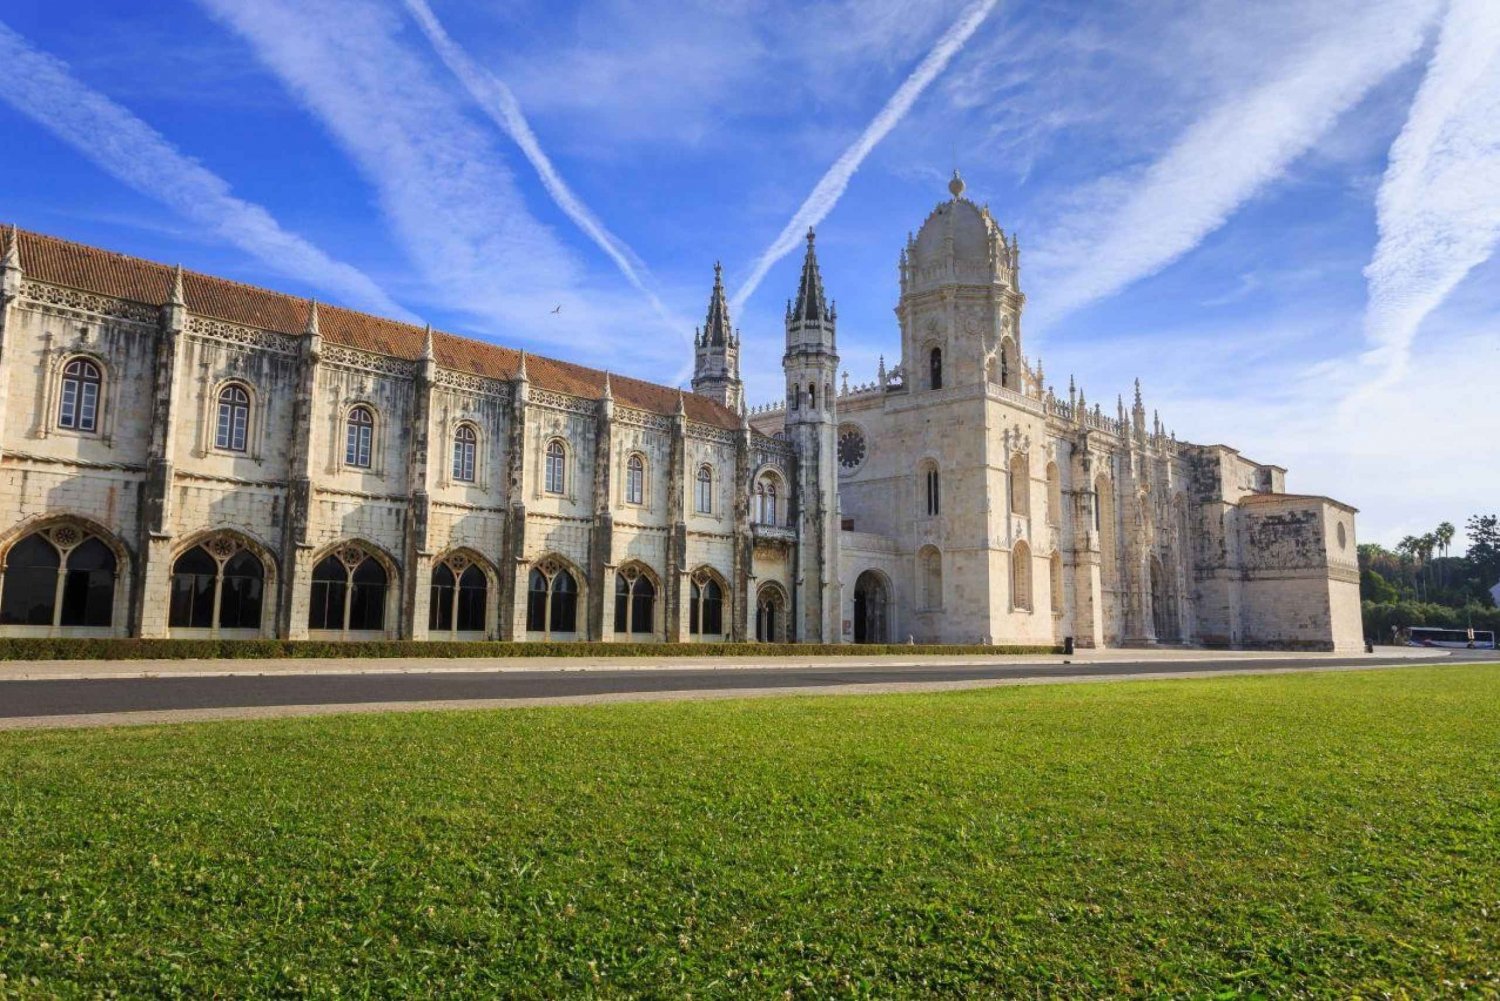 Lisbon: Jerónimos Monastery Entry Ticket and Audioguide